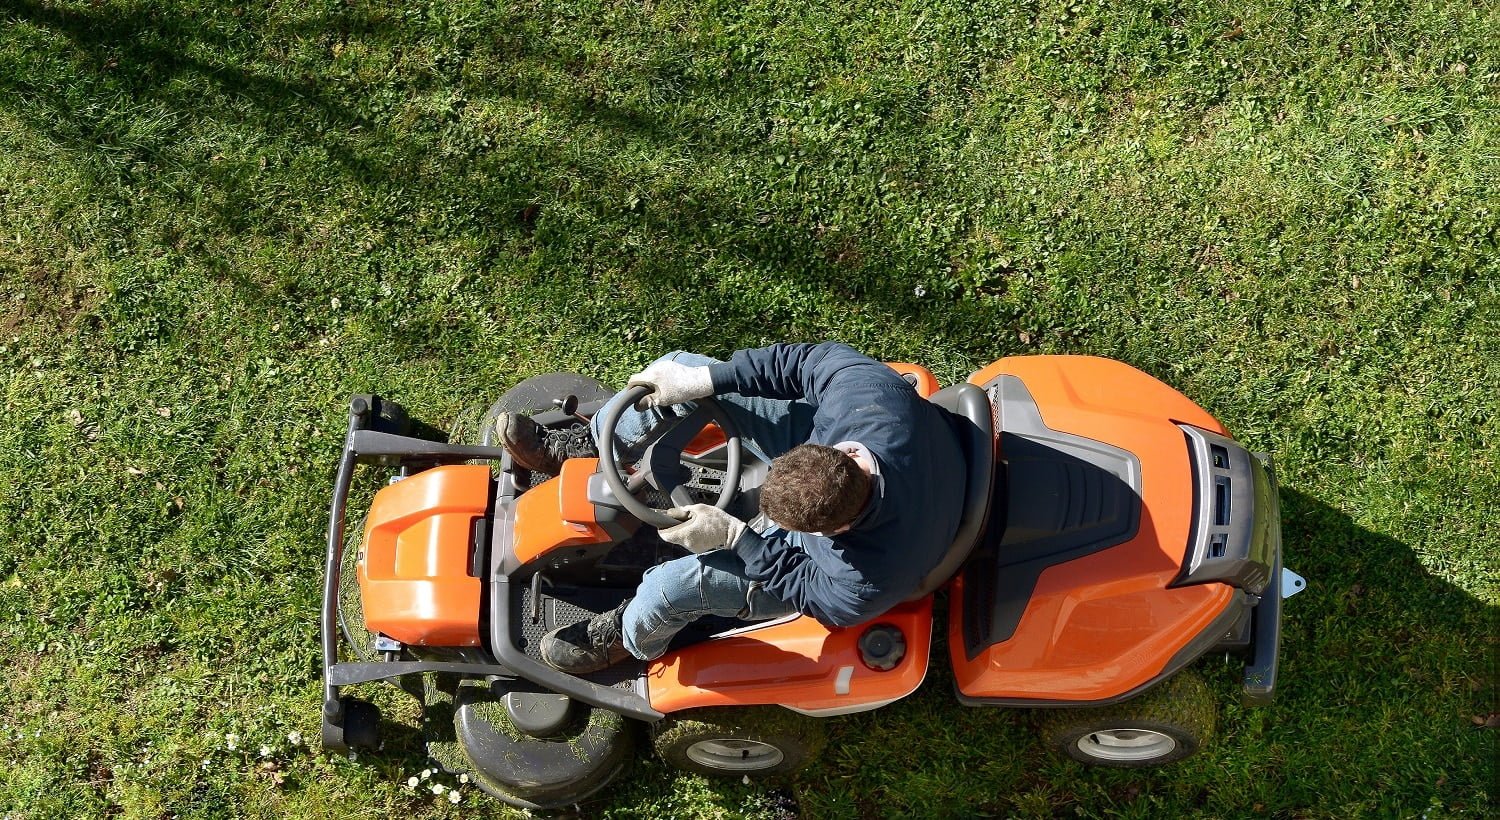 View from above of a man mowing a lawn on an orange ride-on mower as he attends to yard maintenance